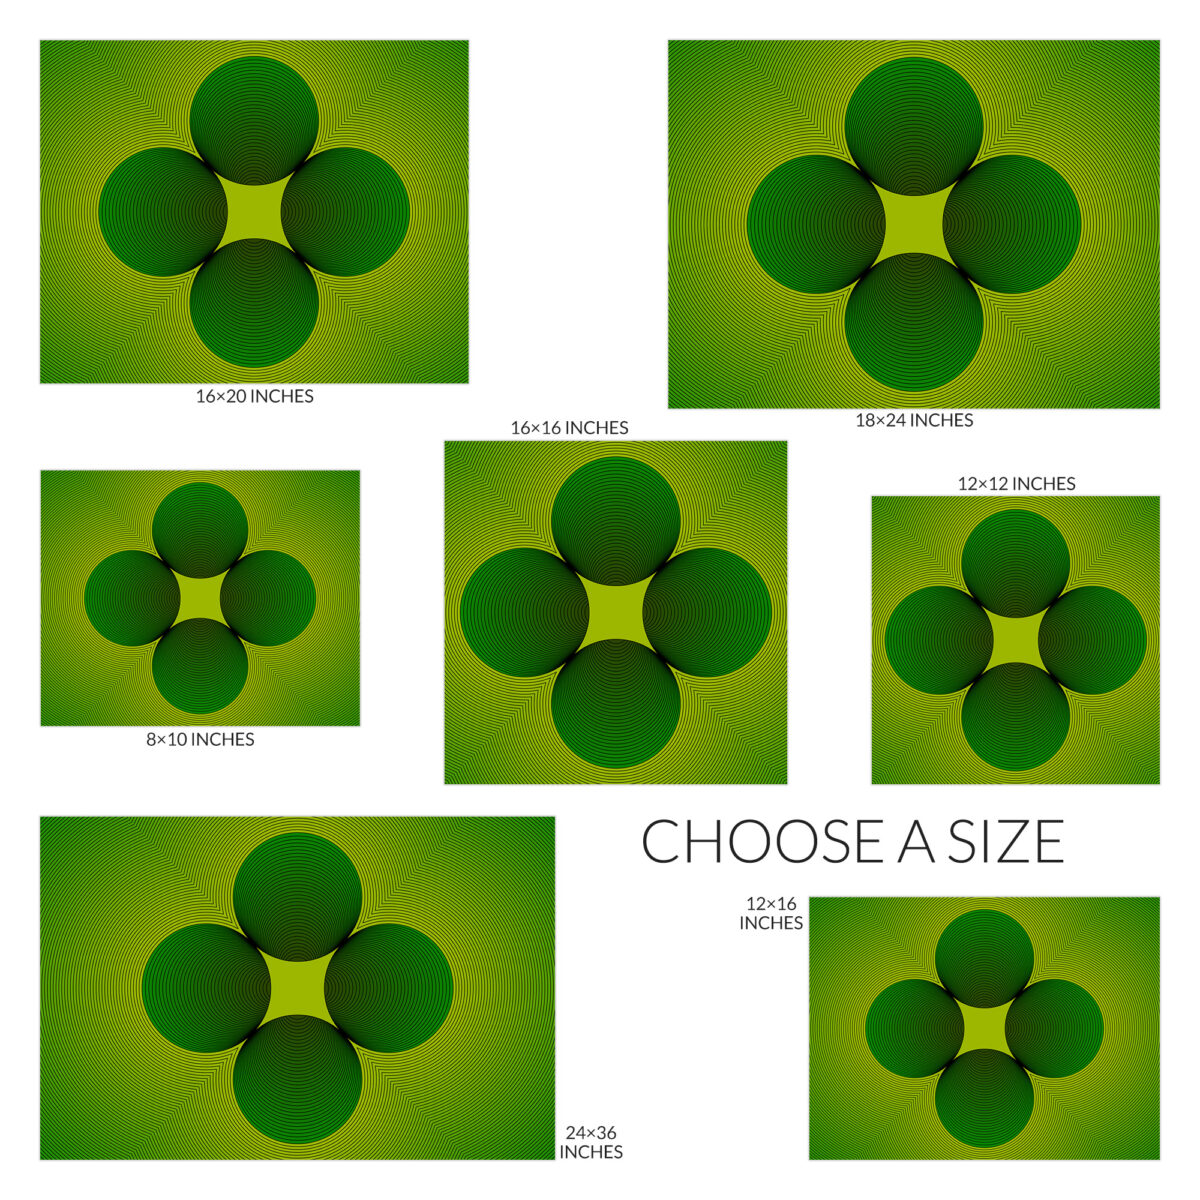 Clover design, choose a size. Available sizes are 8 inch by 10 inch, 12 inch square, 12 inch by 16 inch, 16 inch square, 16 inch by 20 inch, 18 inch by 24 inch, and 24 inch by 36 inch.